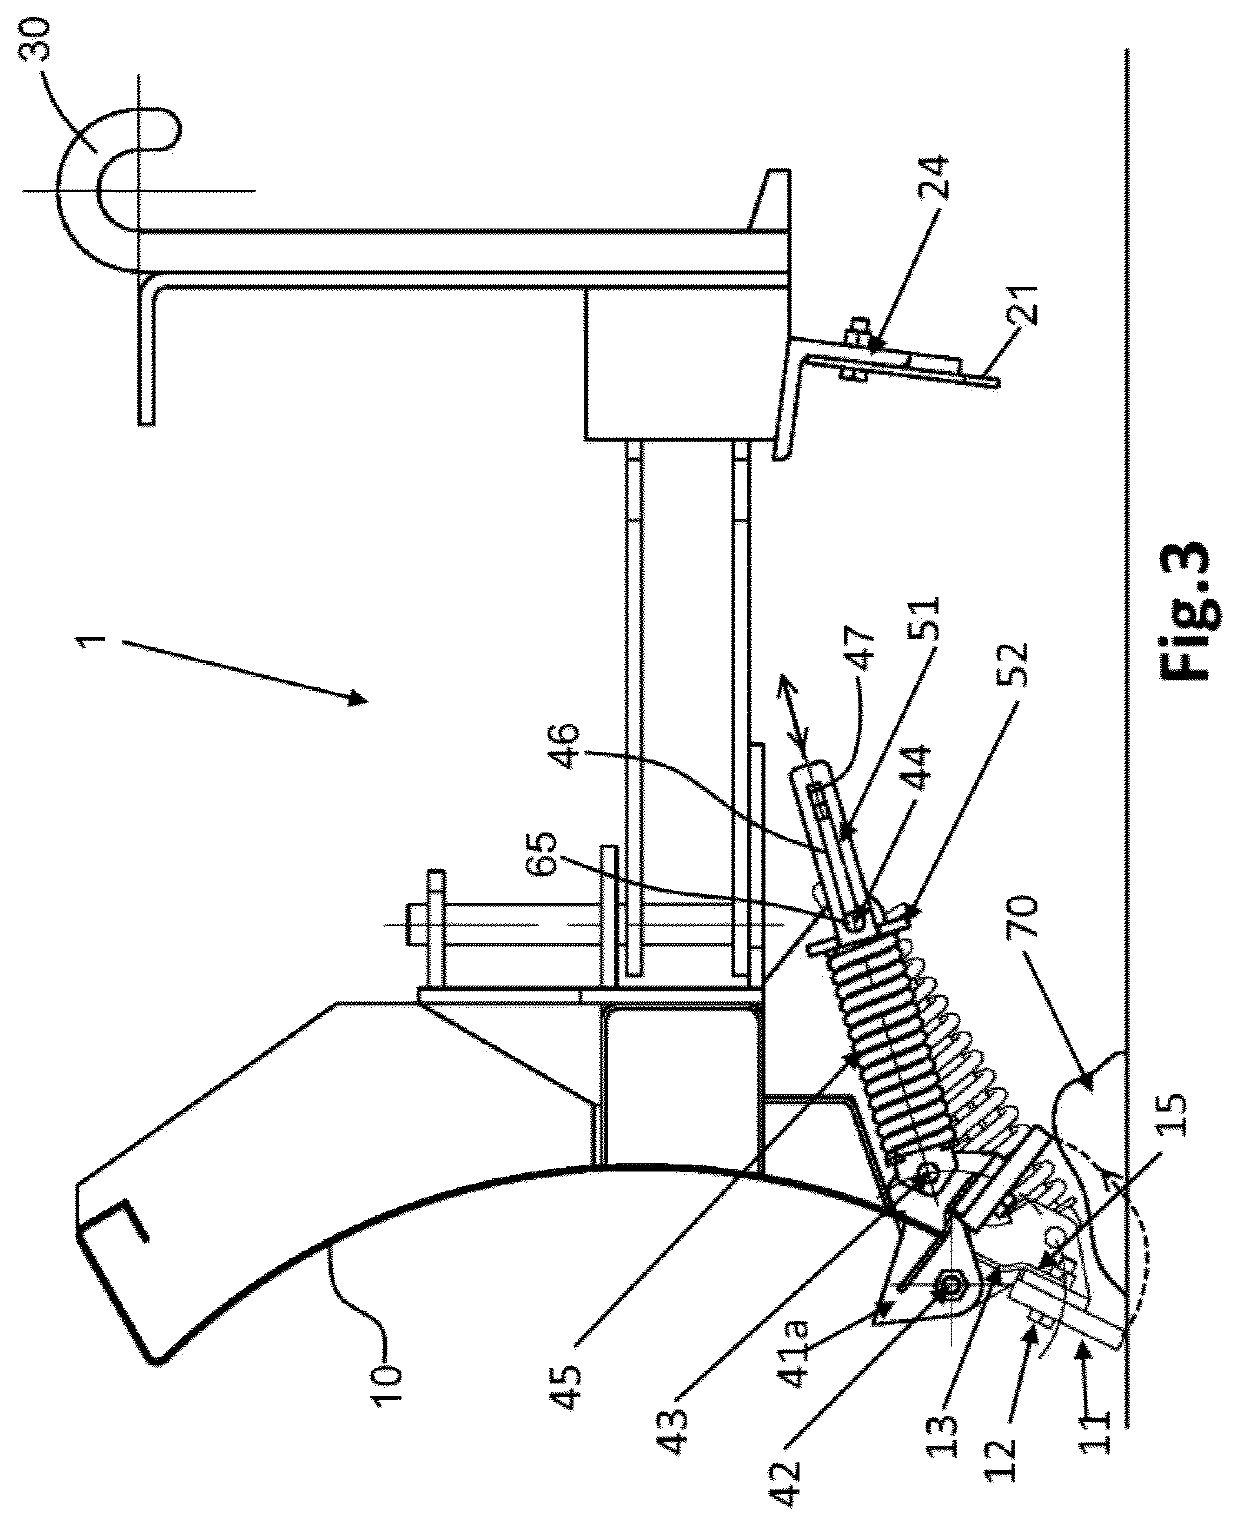 Snowplow with positive rake angle cutting blade and ice scraper